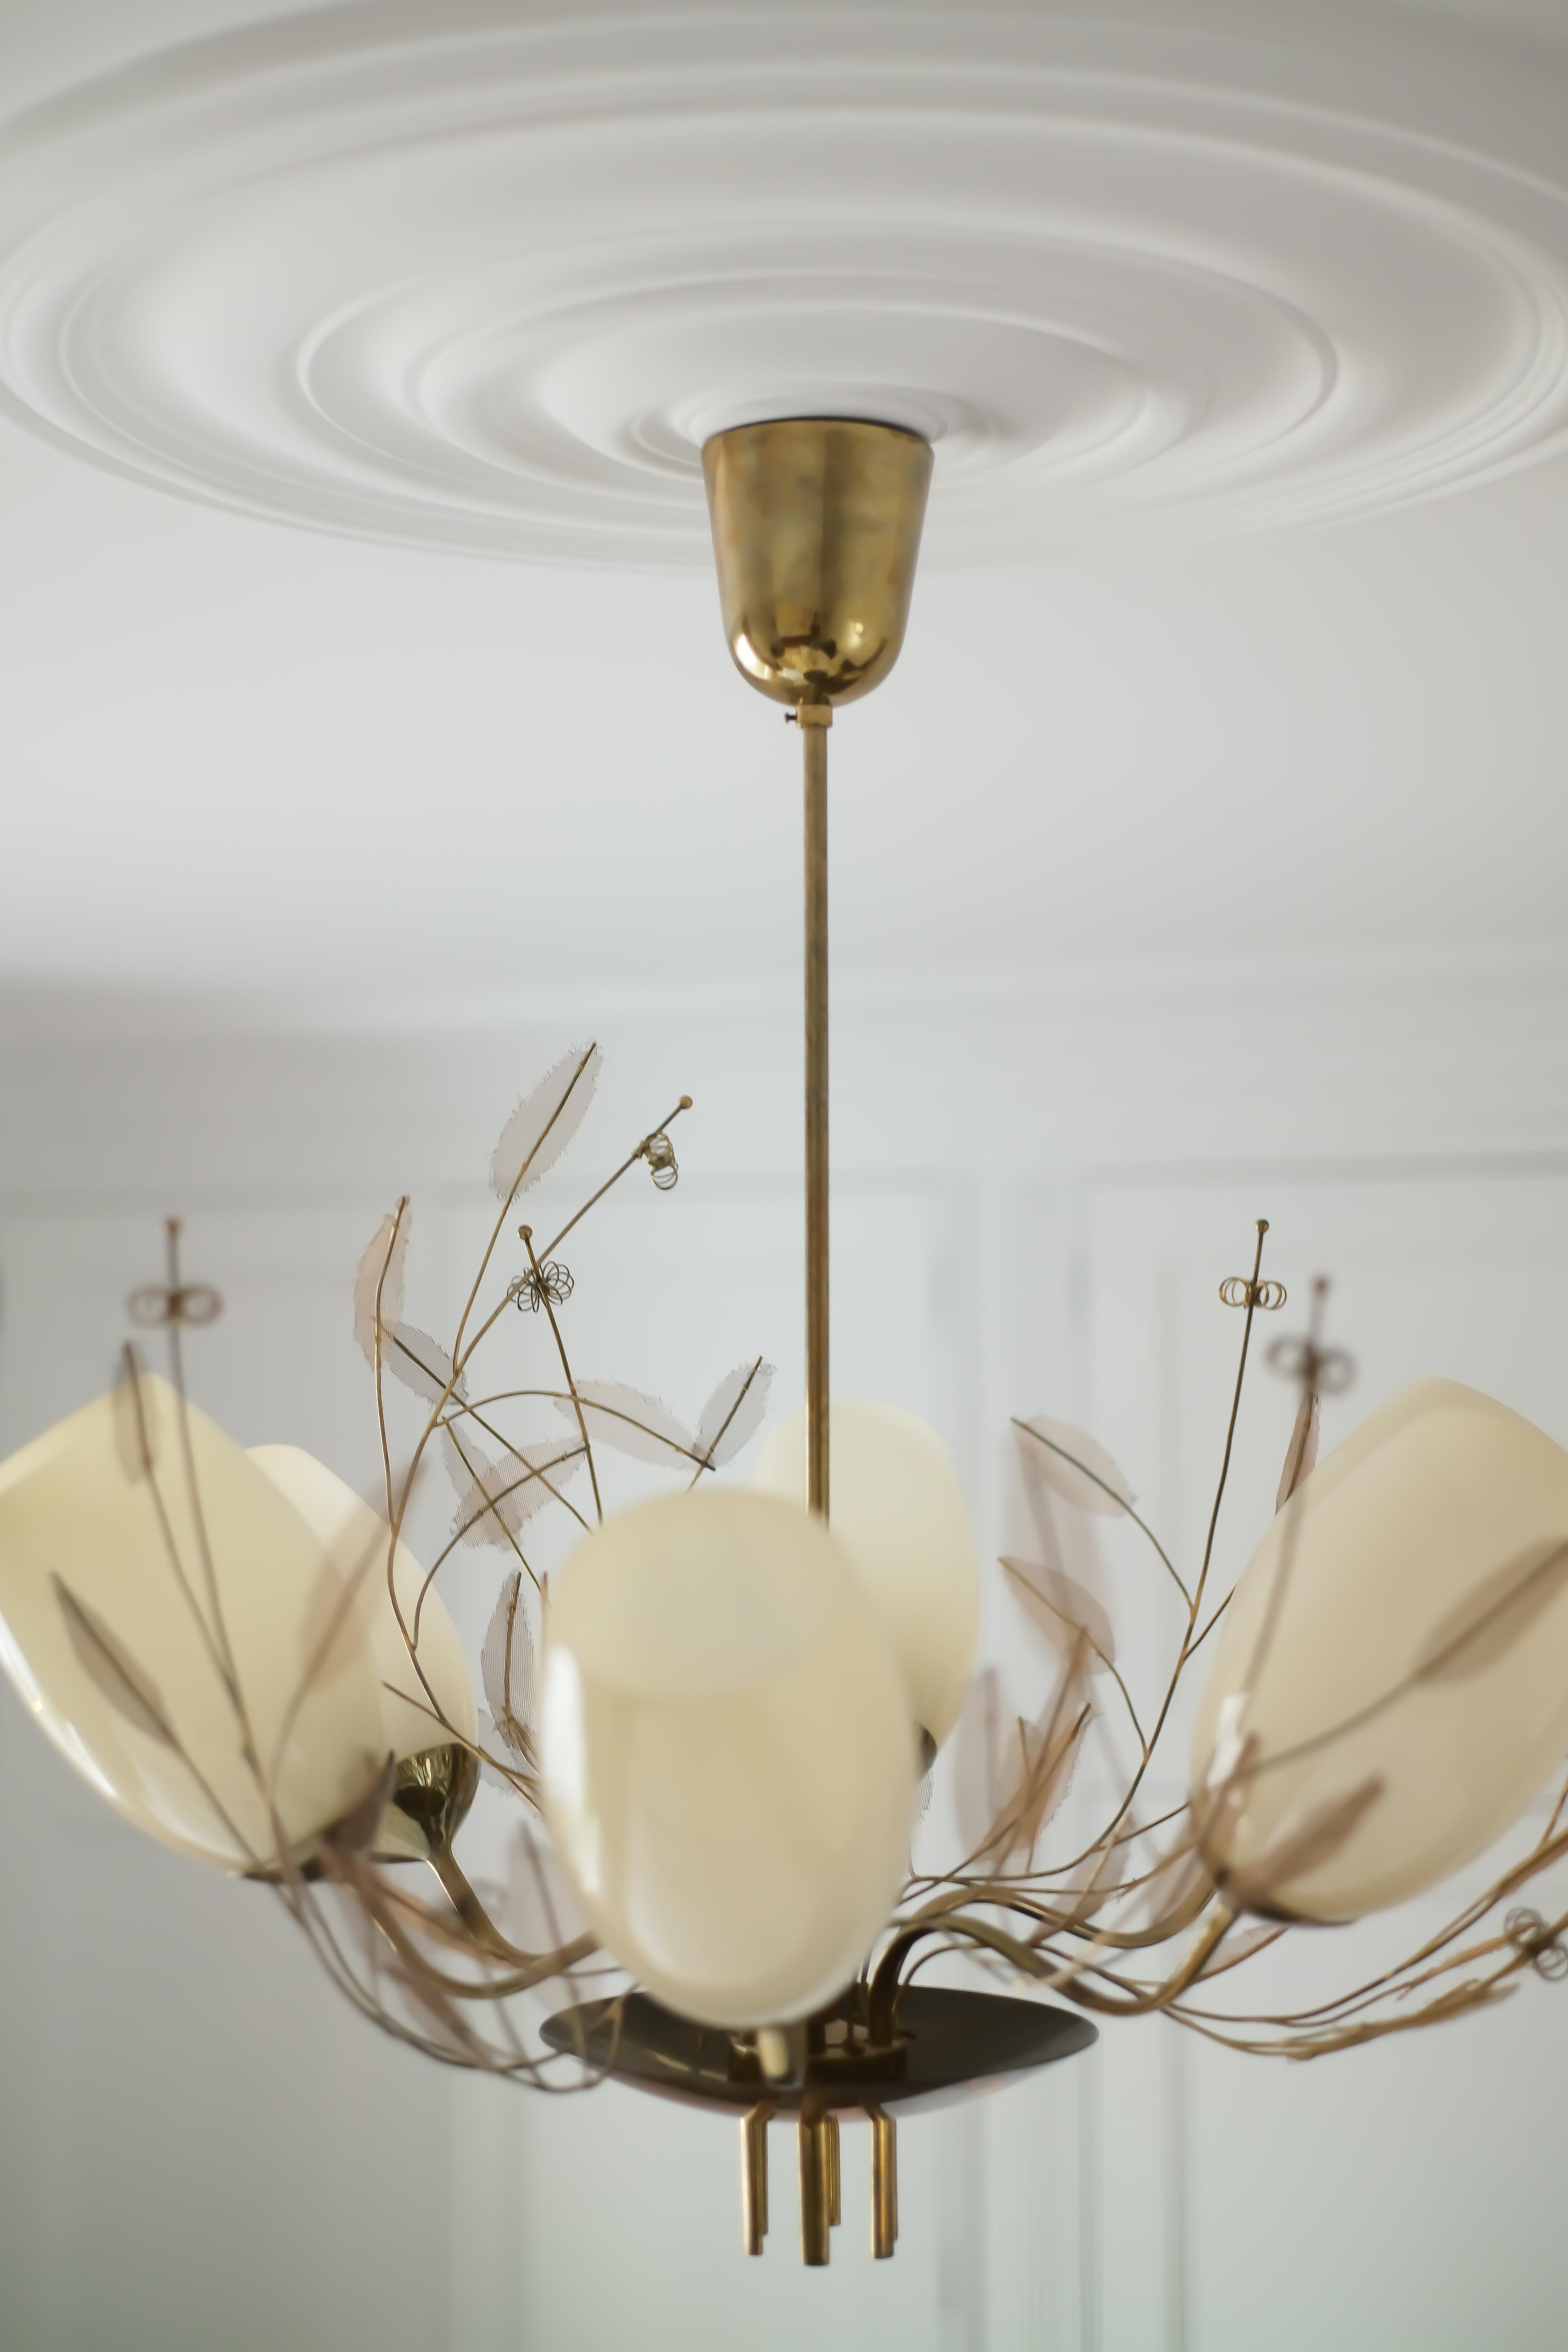 Paavo Tynell, Taito Oy, Pendant lamp / Chandelier, model 9029/6

A spectacular and very rare Paavo Tynell for Taito Oy Model 9029/6 chandelier from the “Concerto” series (c. 1948). The item is in original working order and has not be restored or